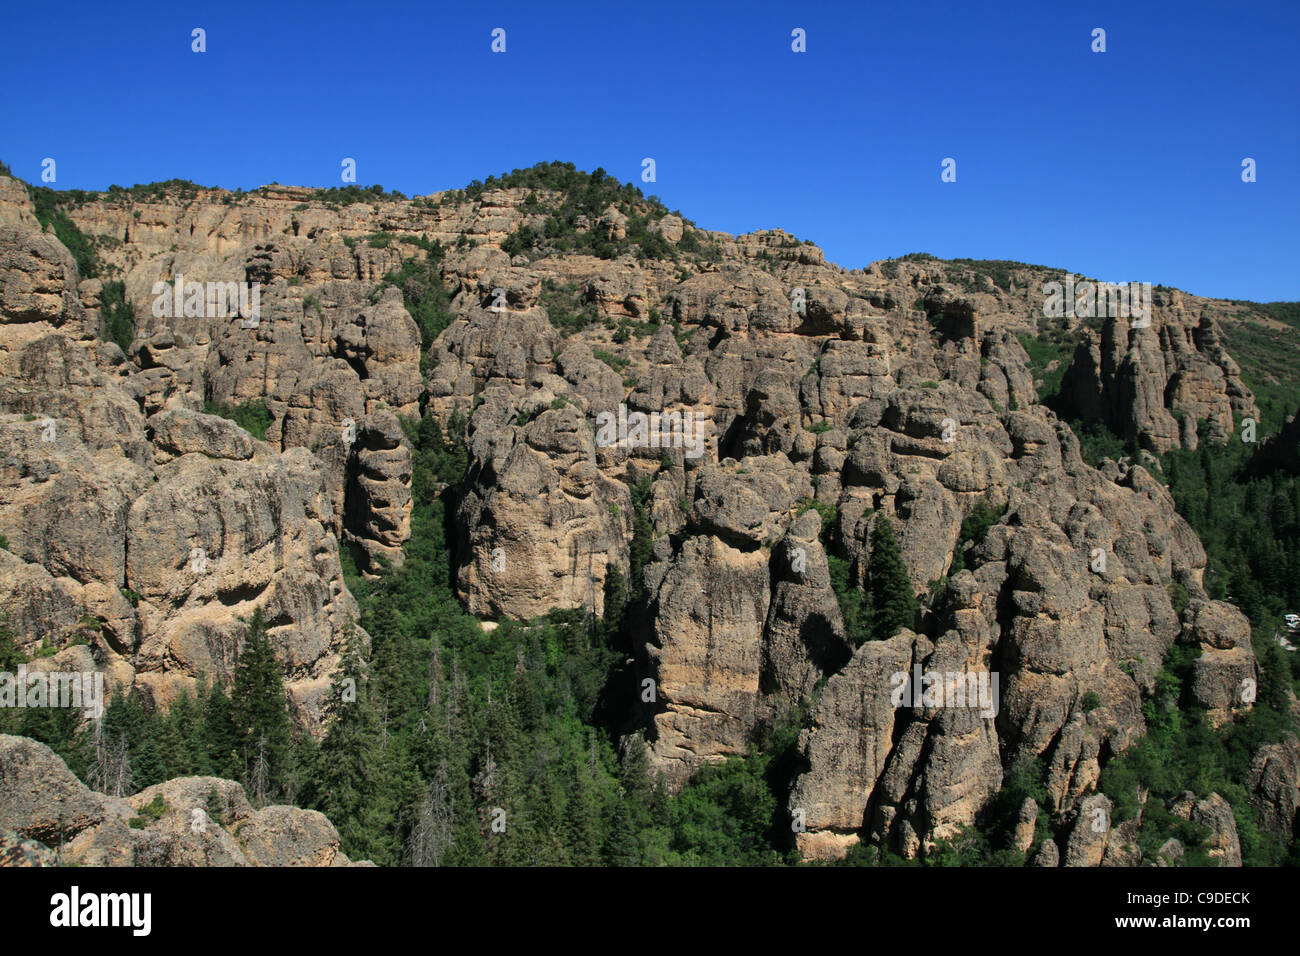 vista of Maple Canyon, Utah cliffs and trees from above Stock Photo